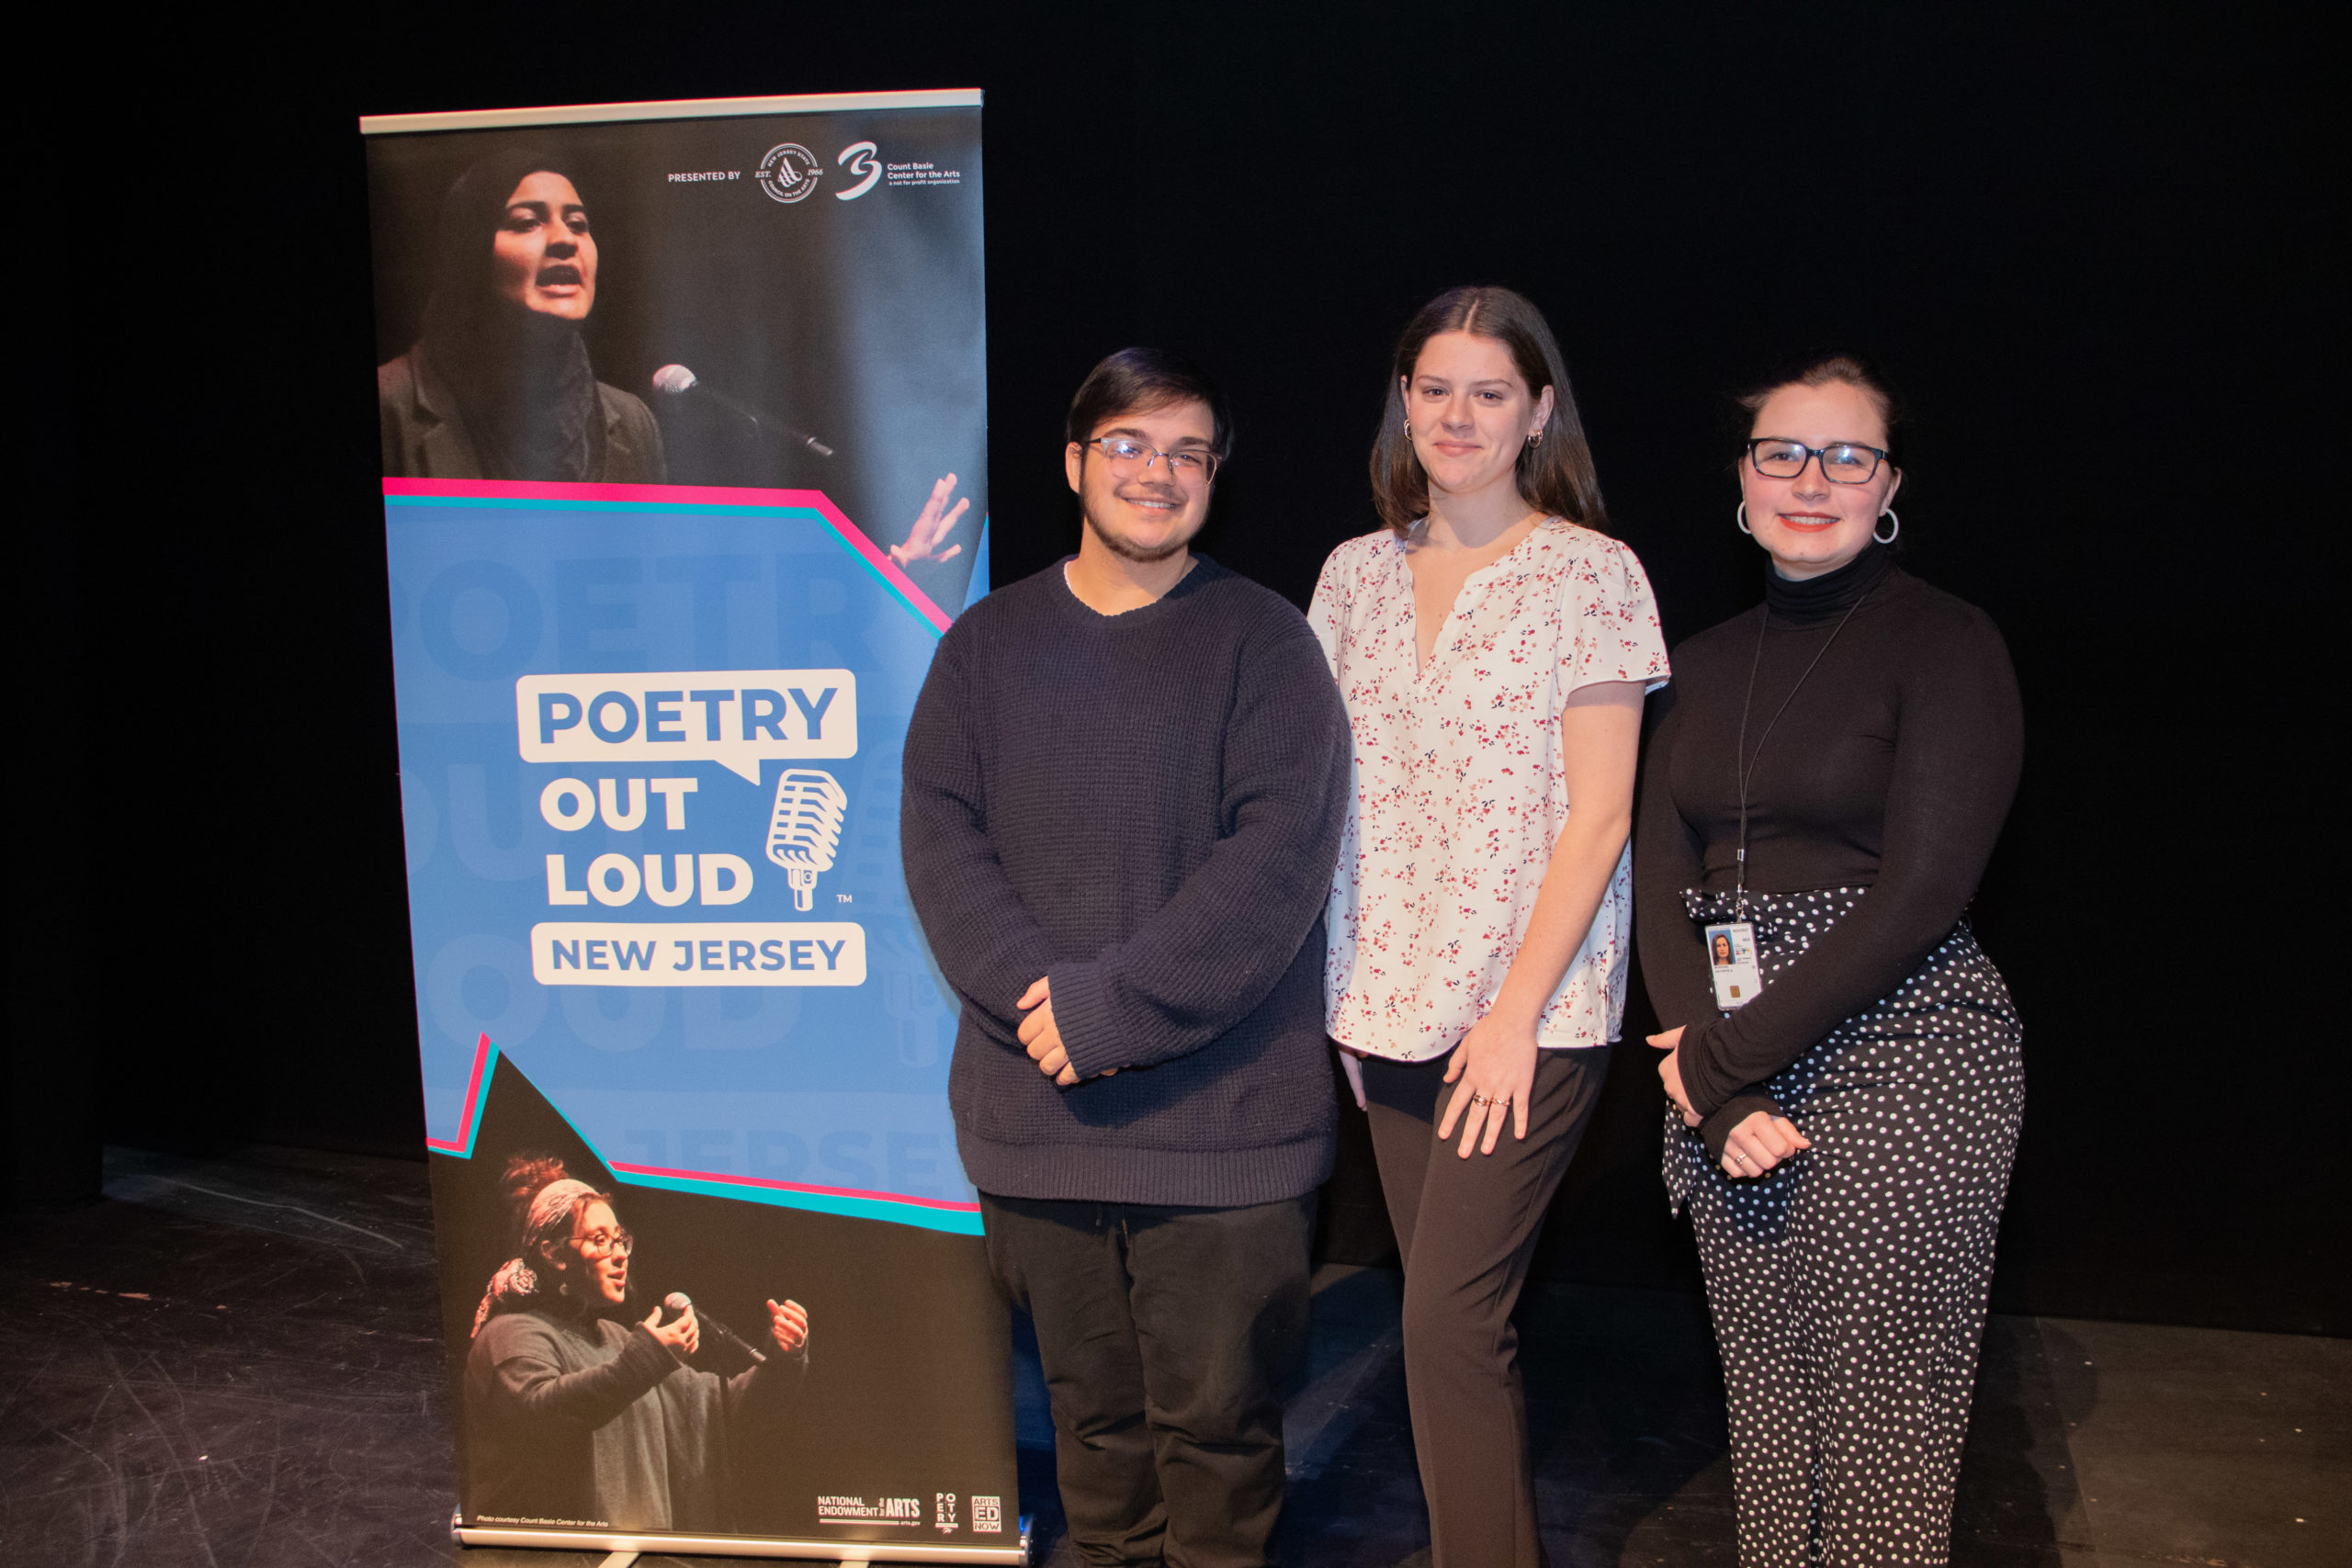 New Jersey Poetry Out Loud Runner-Up Connor Gargiulo (l), Champion Lydia Smith (center) and the Kate Morgan from the National Endowment for the Arts